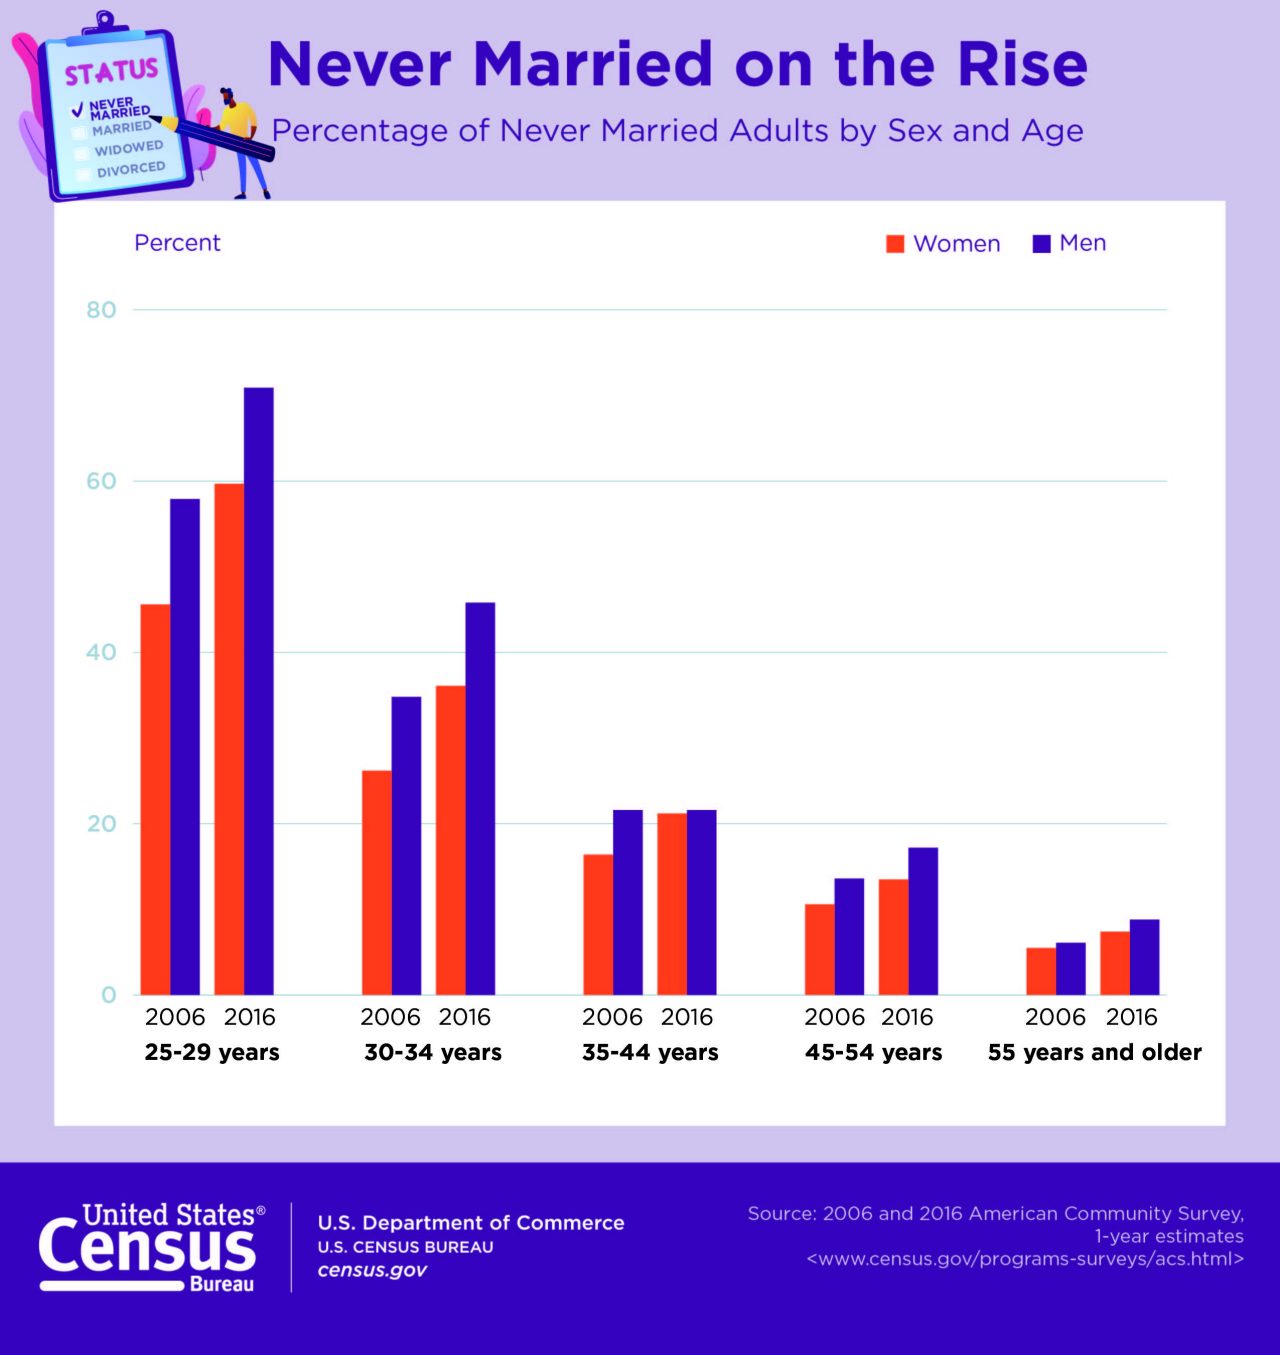 Never Married on the Rise